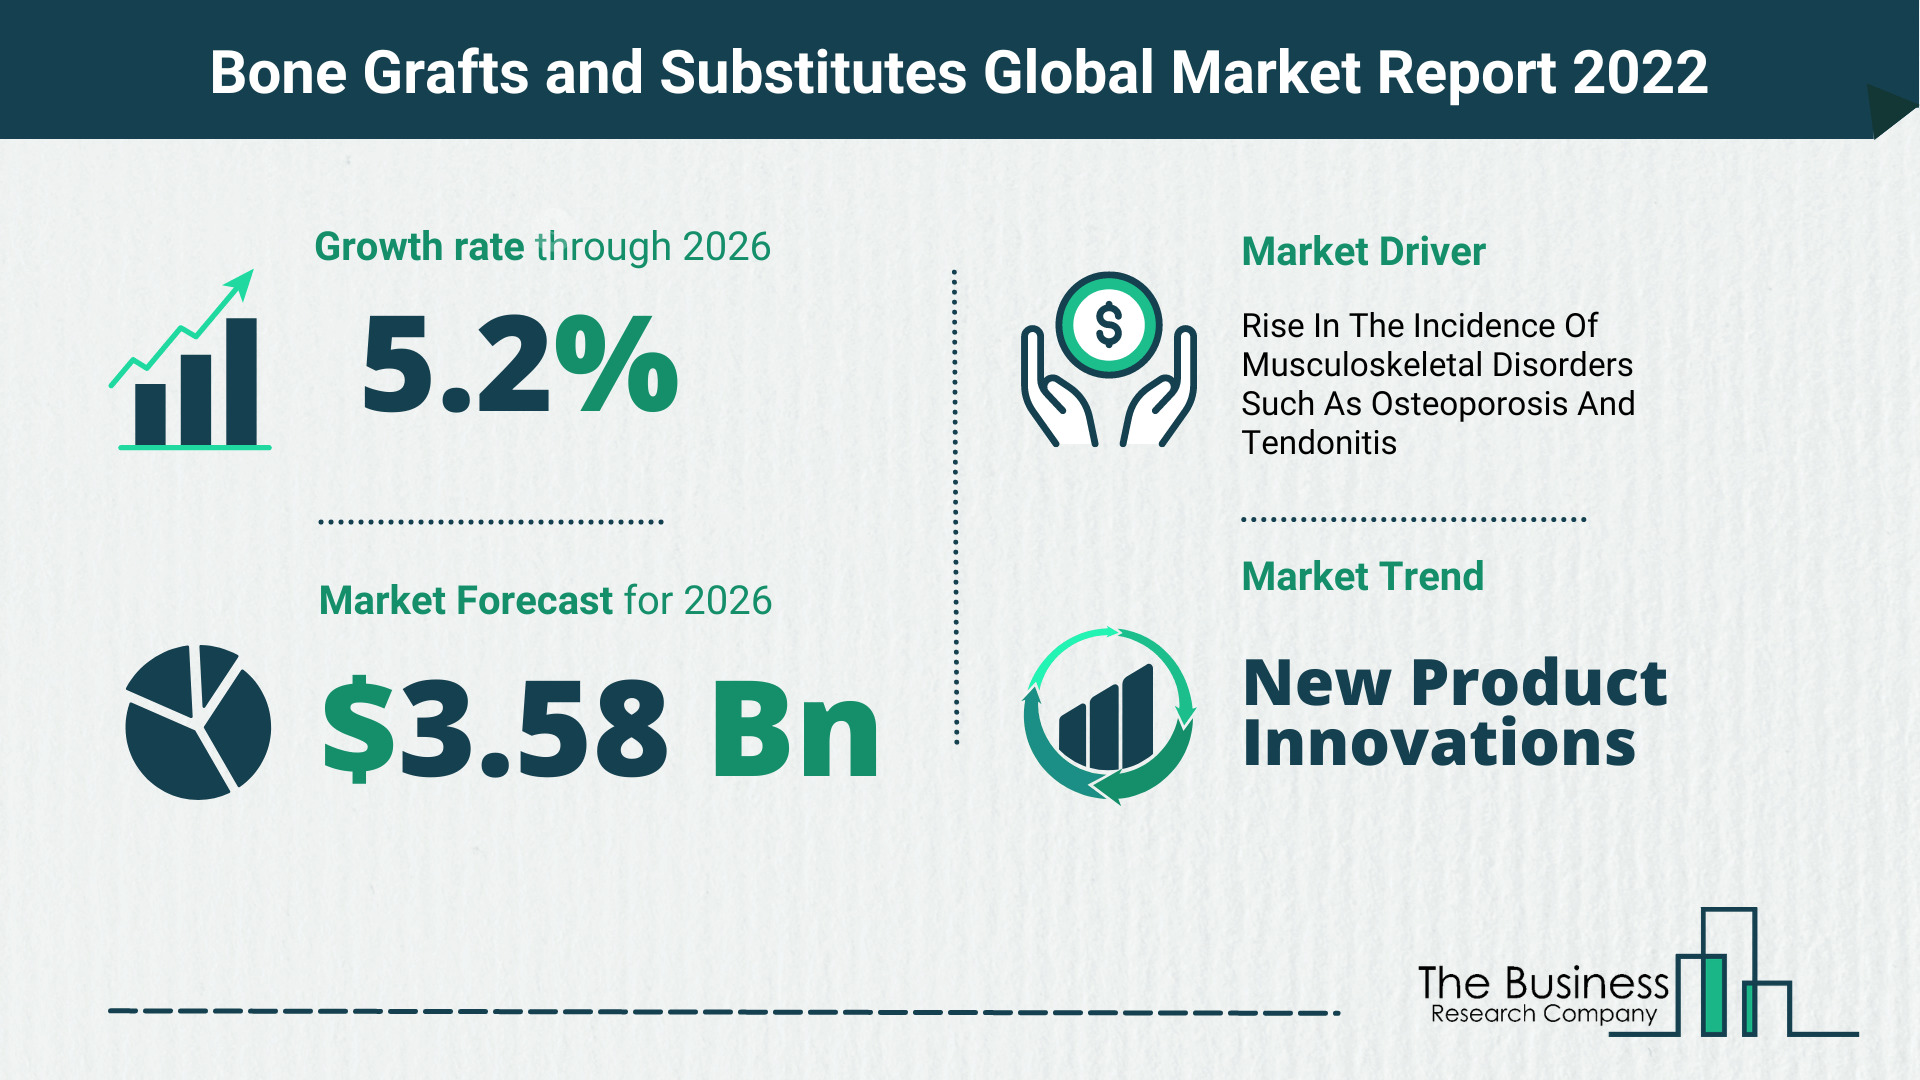 How Will The Bone Grafts and Substitutes Market Grow In 2022?